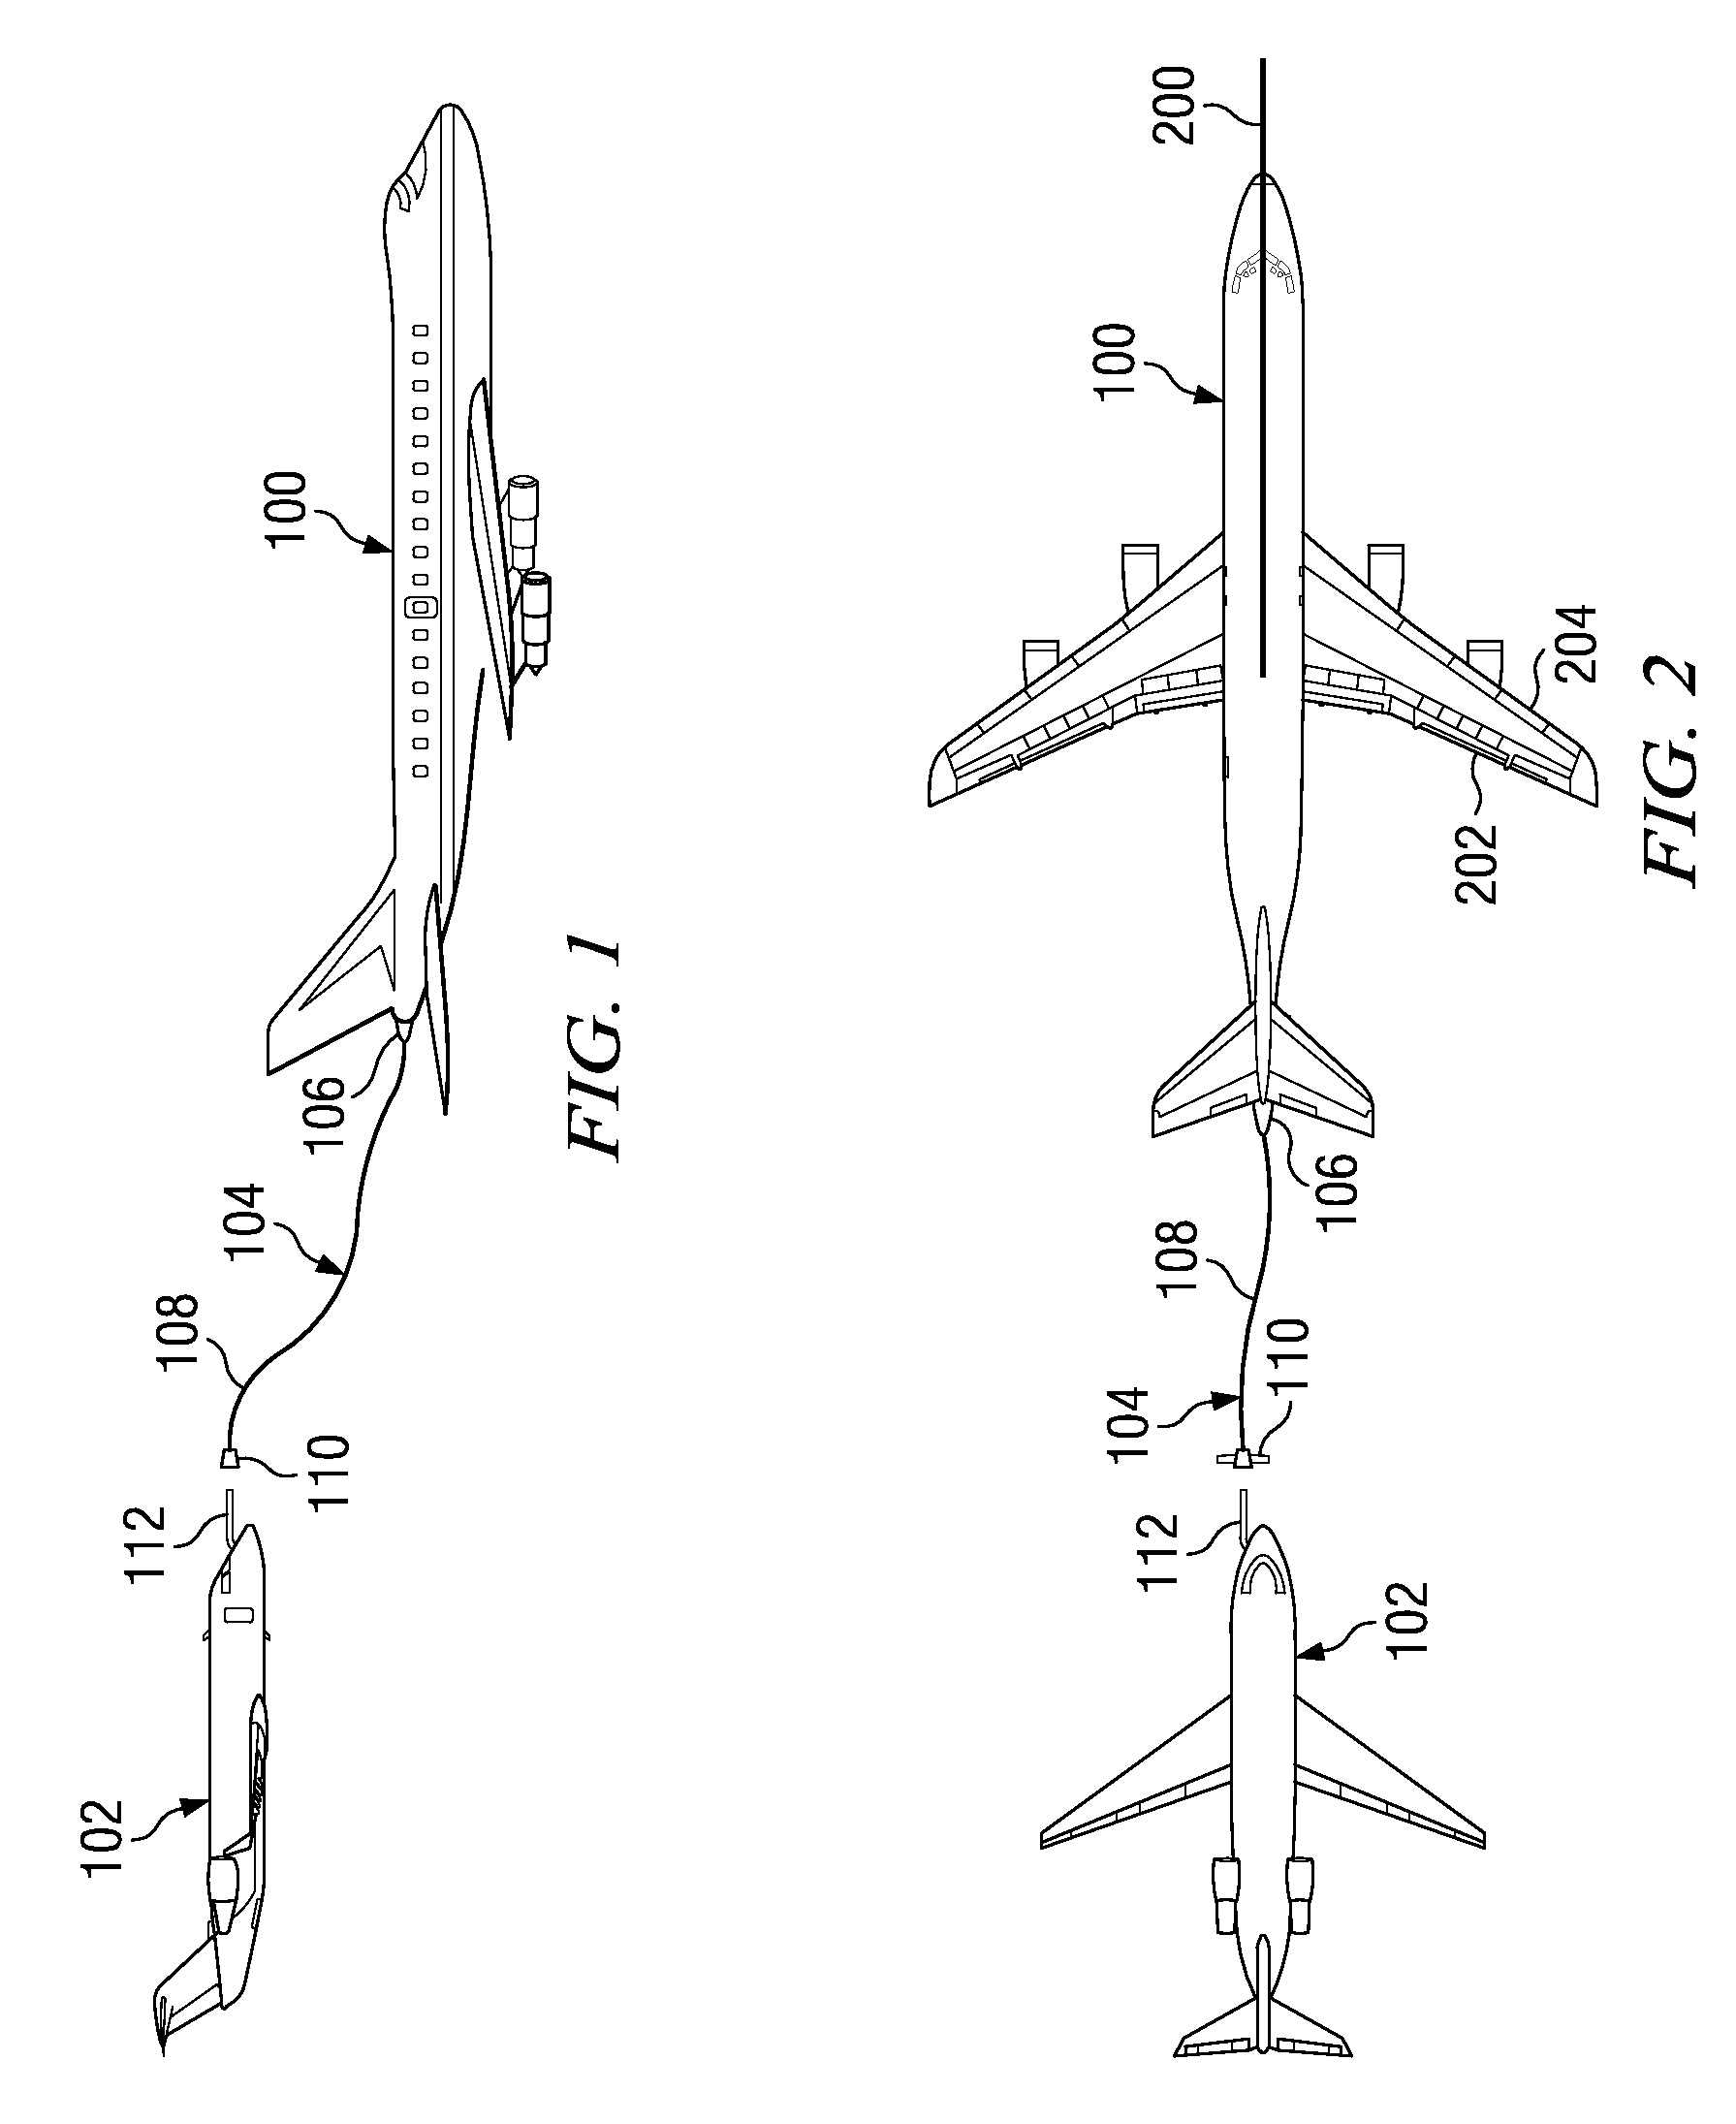 Method and apparatus for aerial fuel transfer